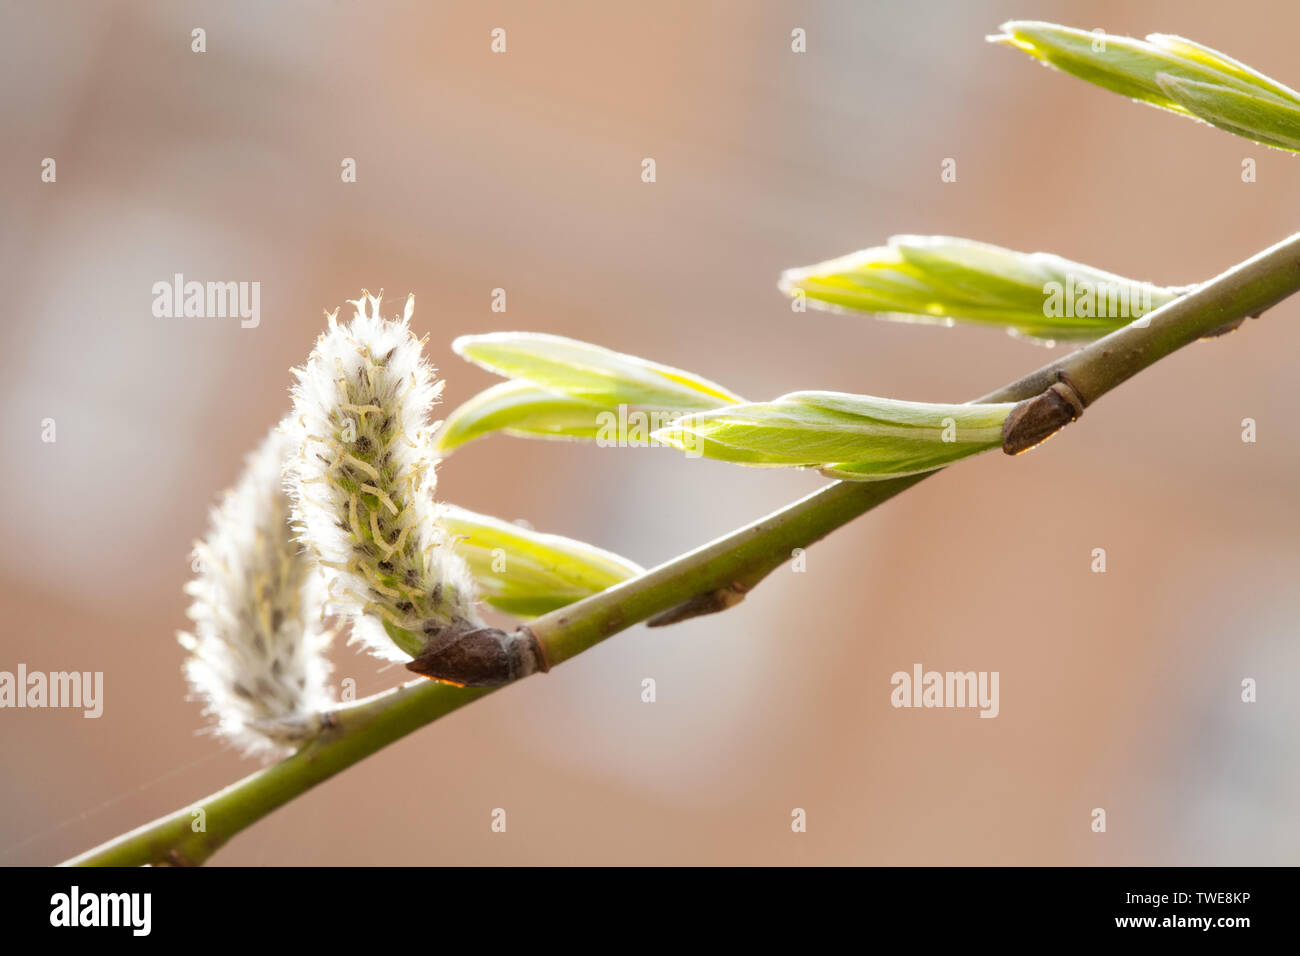 spring light green buds and leaves on willow tree branch closeup view on outdoor sunny blurred background Stock Photo